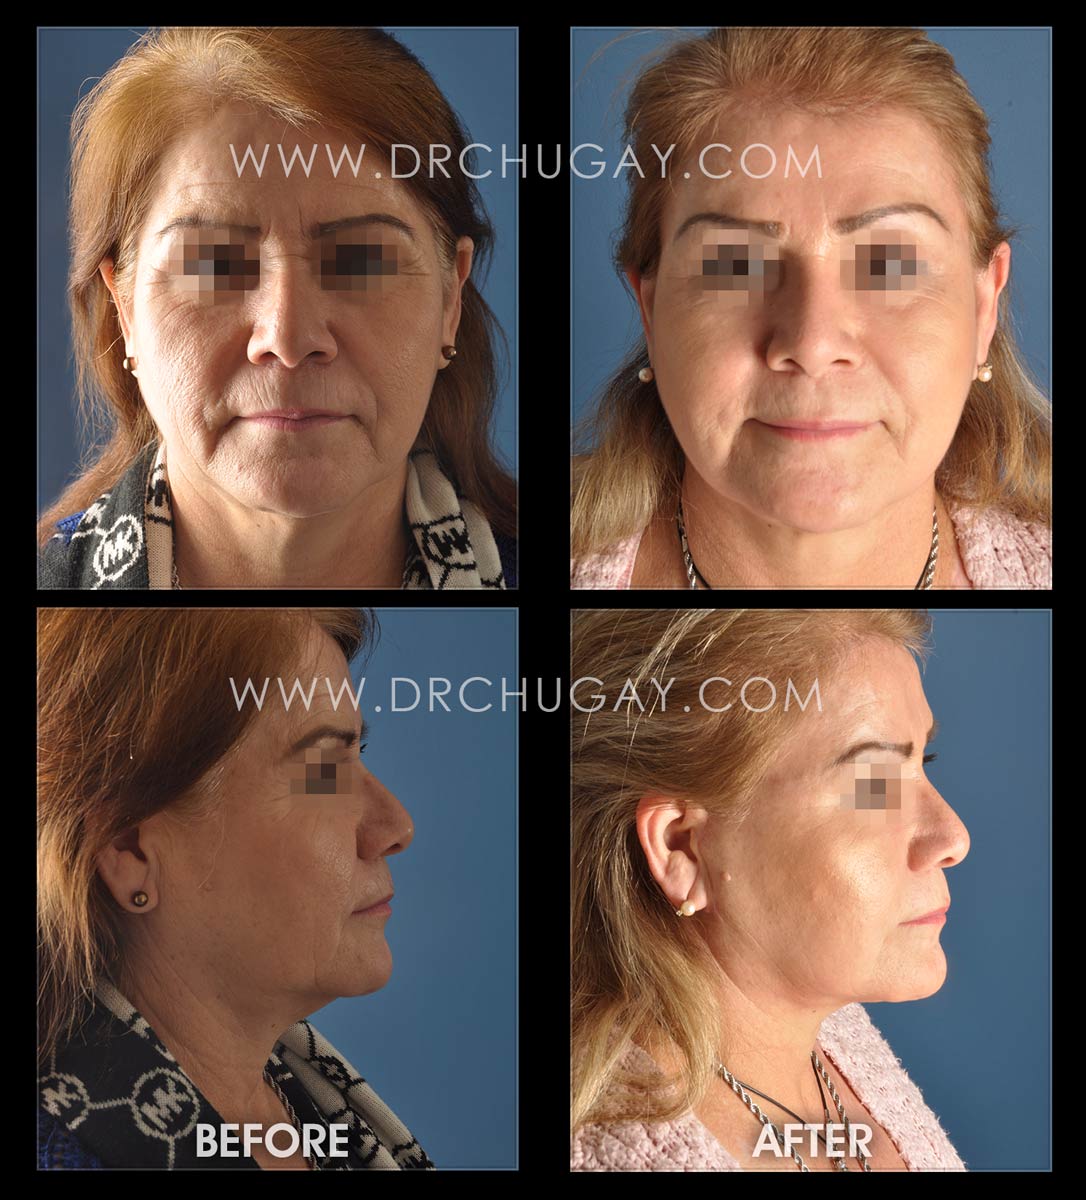 64yo before and 8 months after face and neck lift.